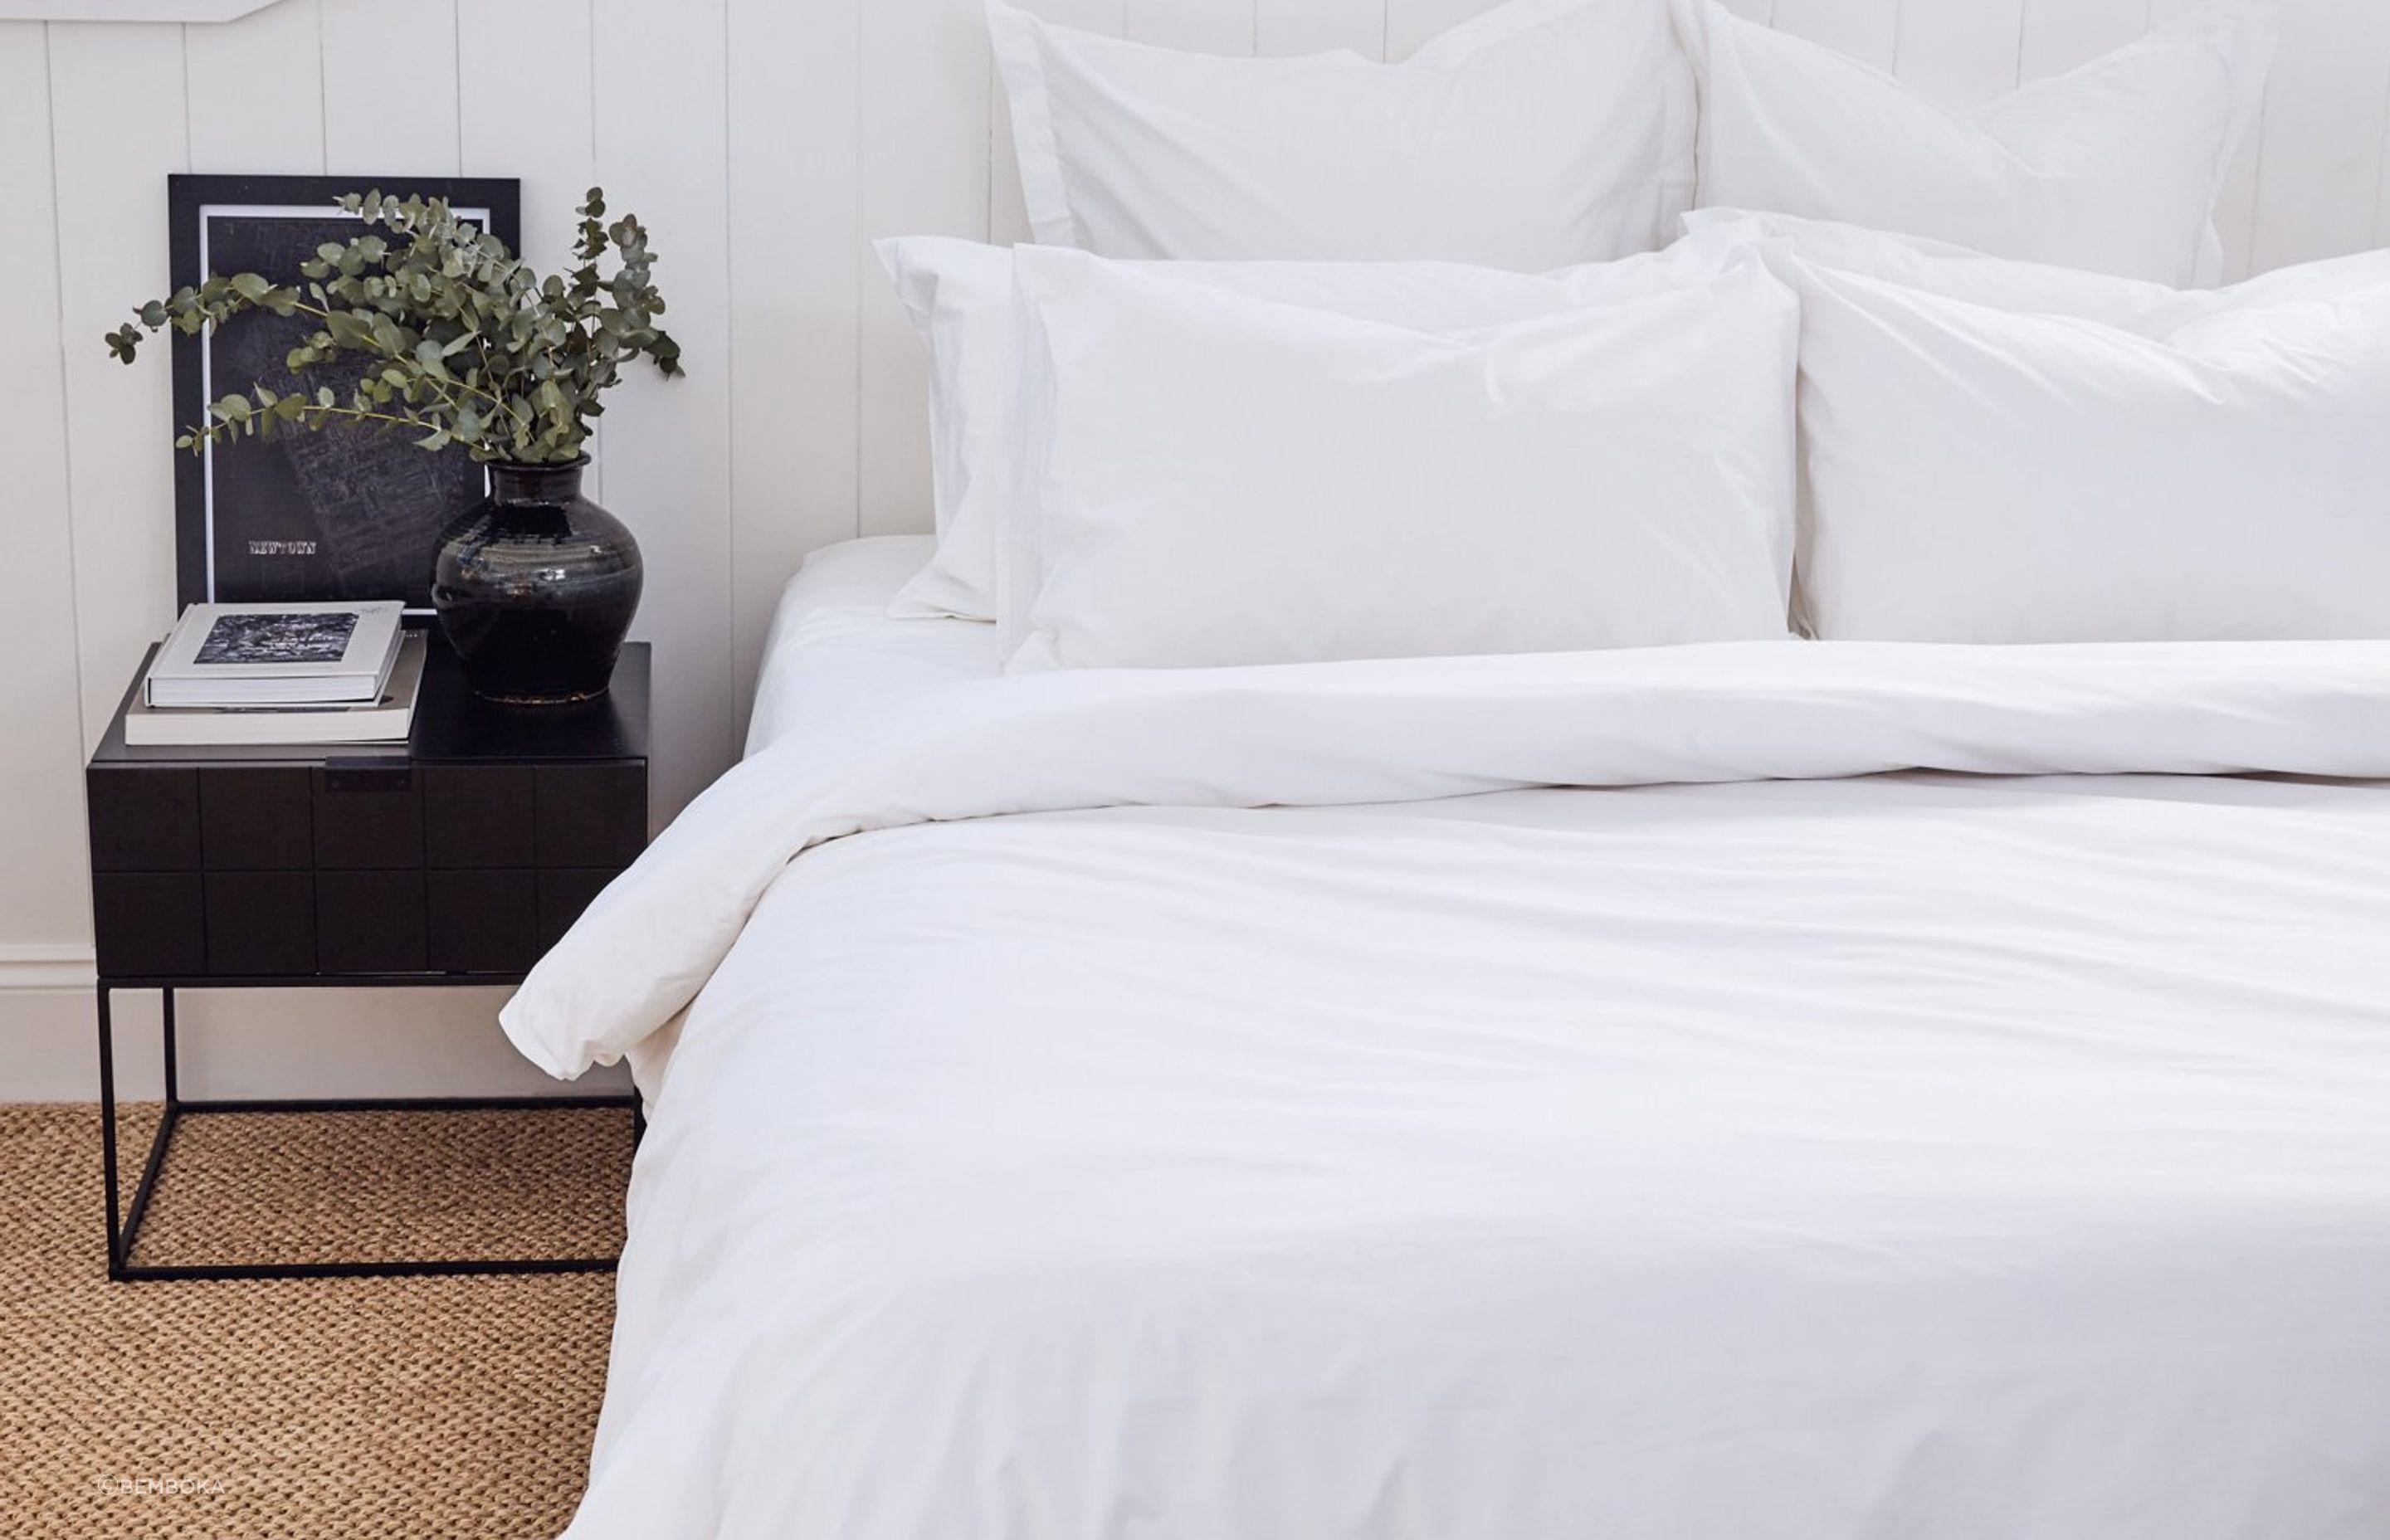 Options like the Pure Cotton Queen Fitted Sheet provides a dependable night's sleep for one and all